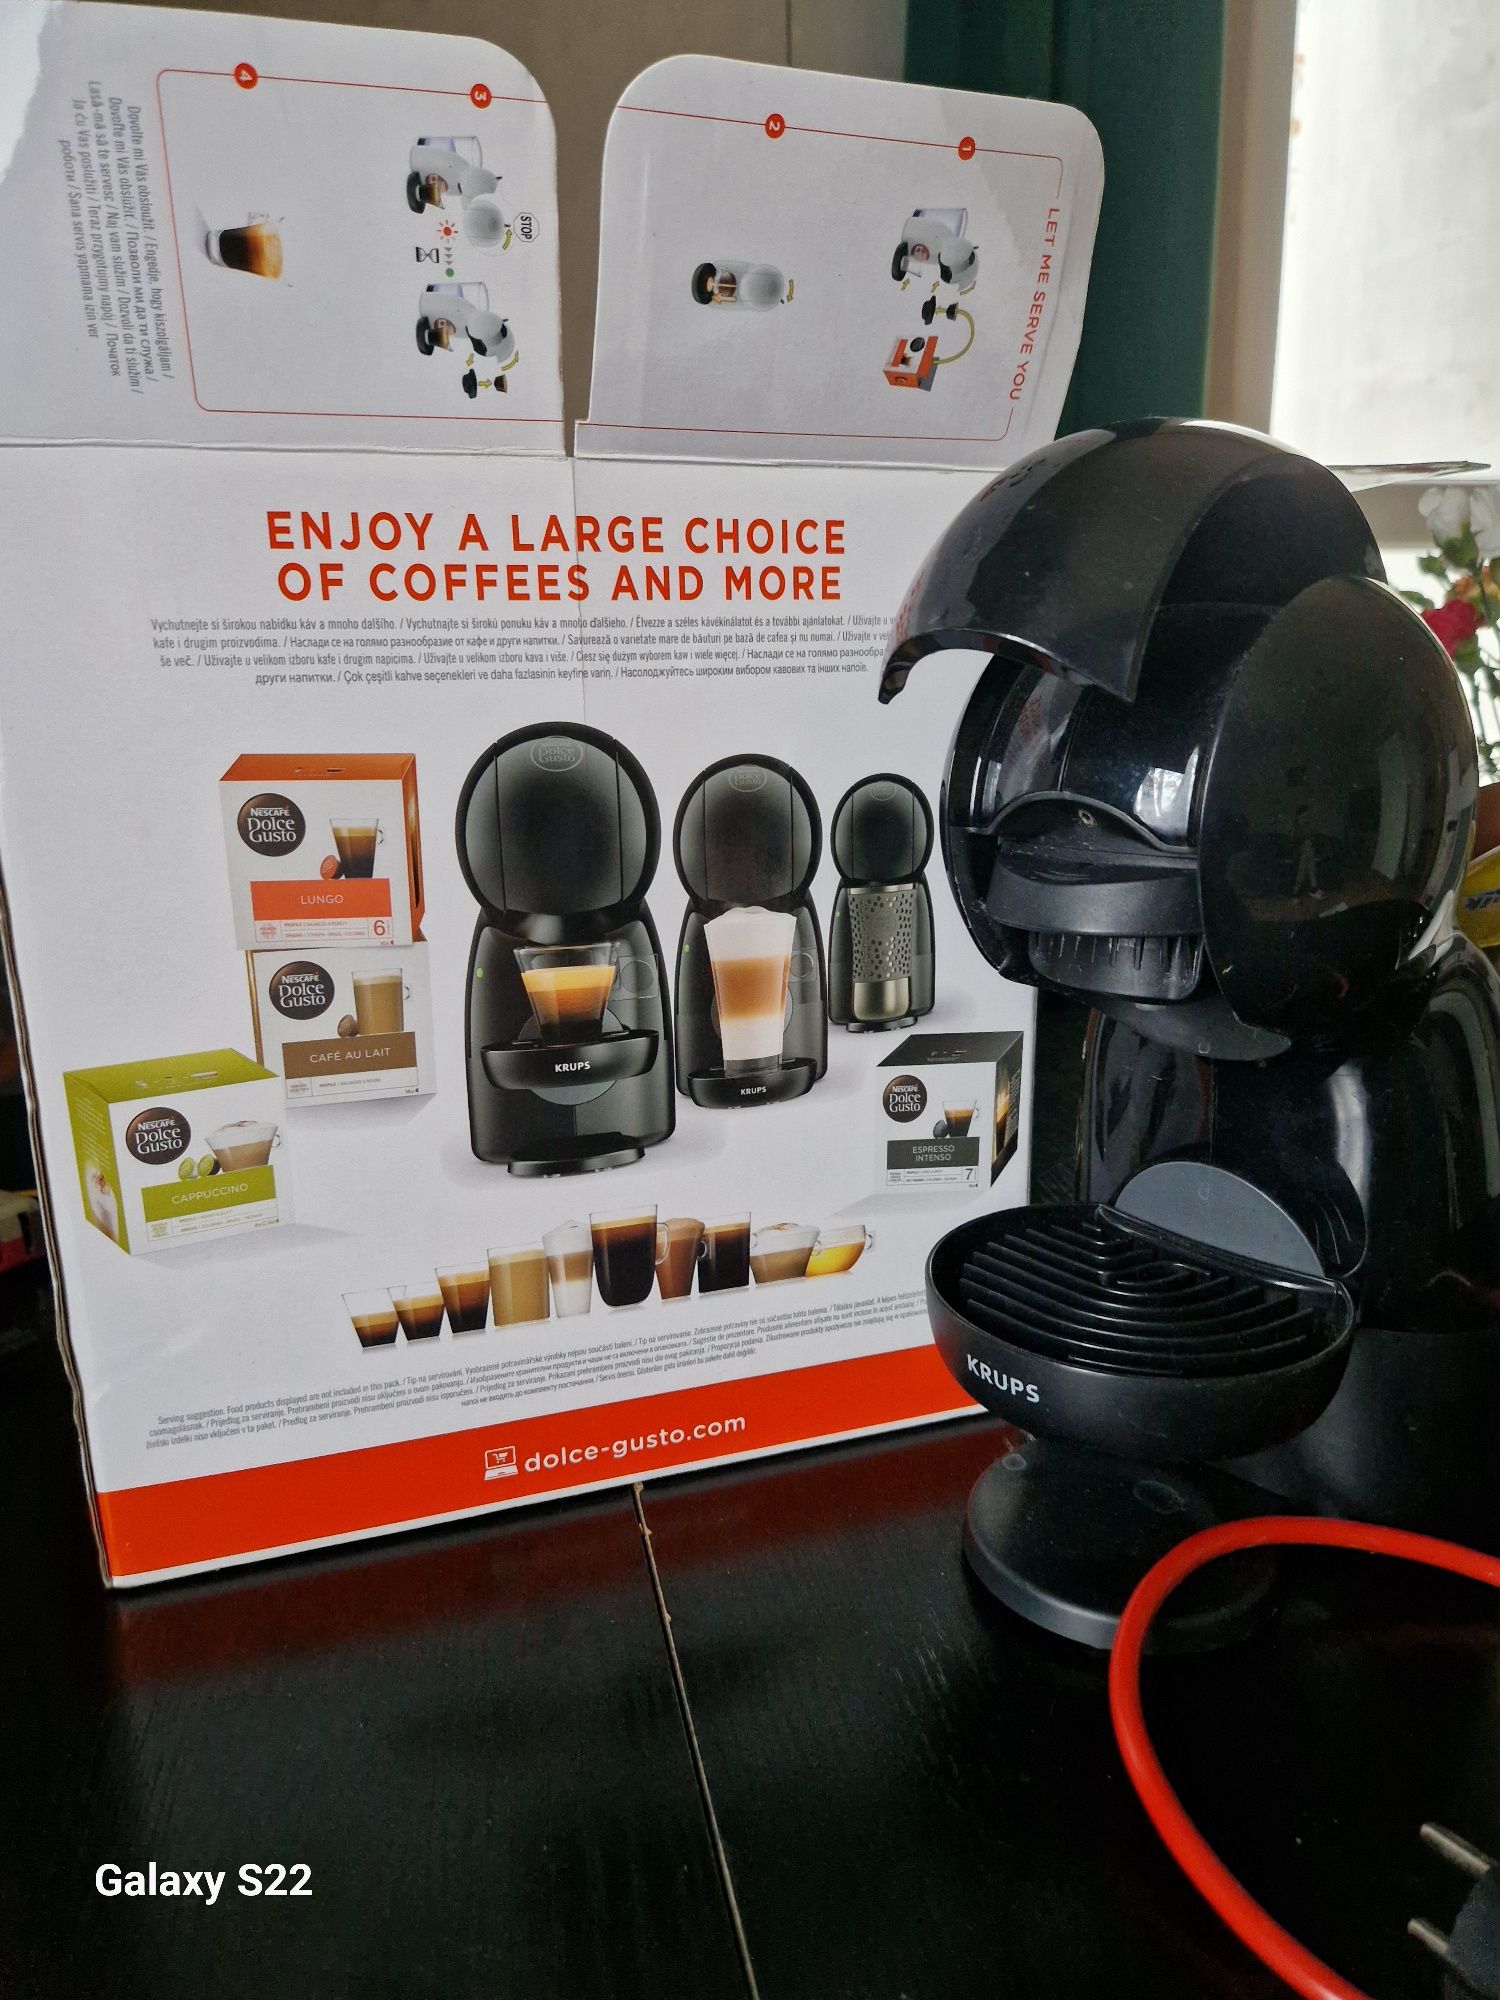 KRUPS Dolce Gusto